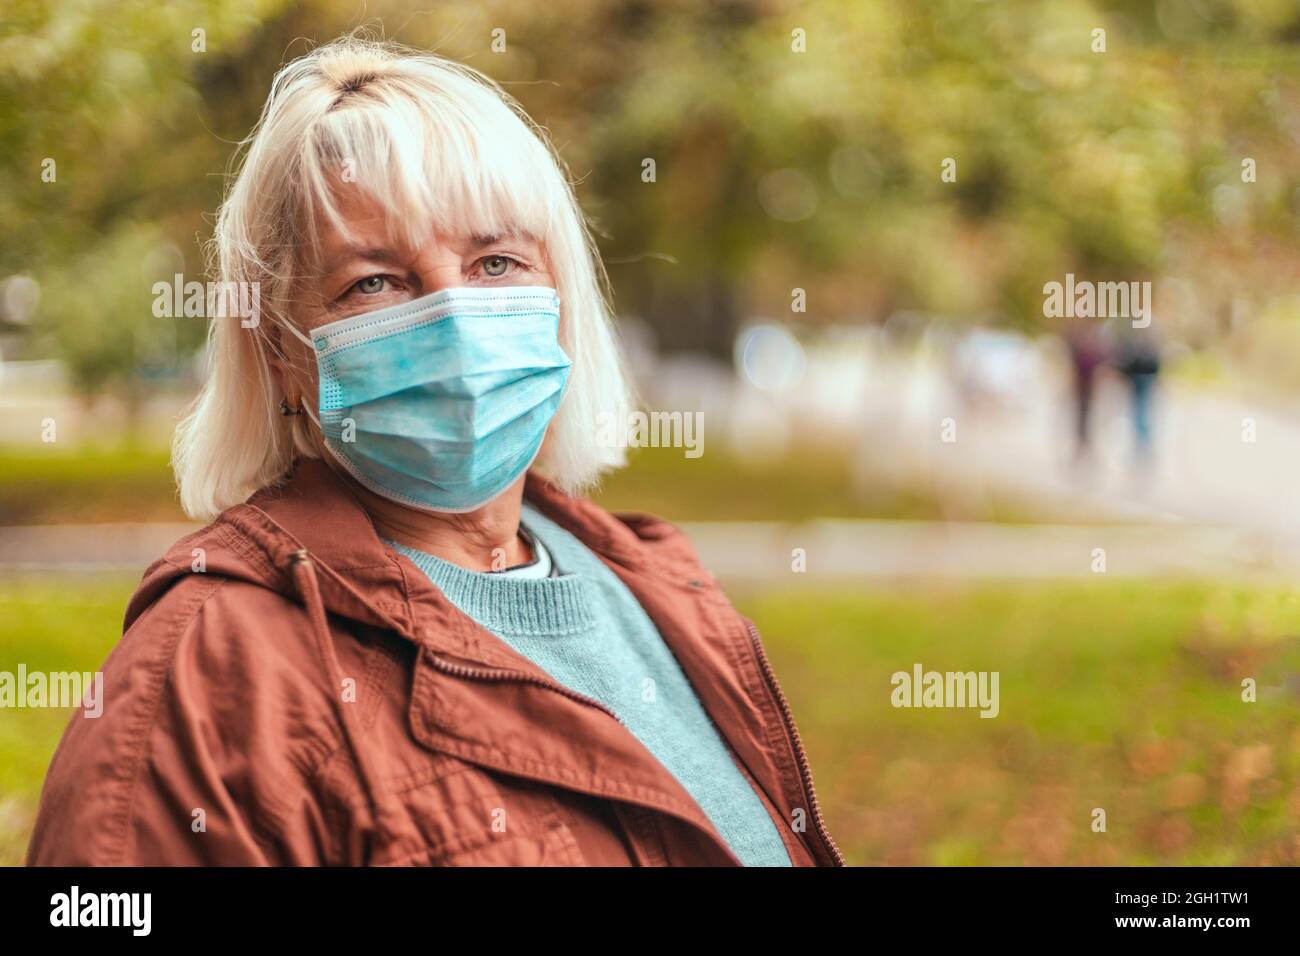 Coronavirus, COVID-19 Pandemic concept. Blonde woman in wearing face mask protective for disease virus Stock Photo